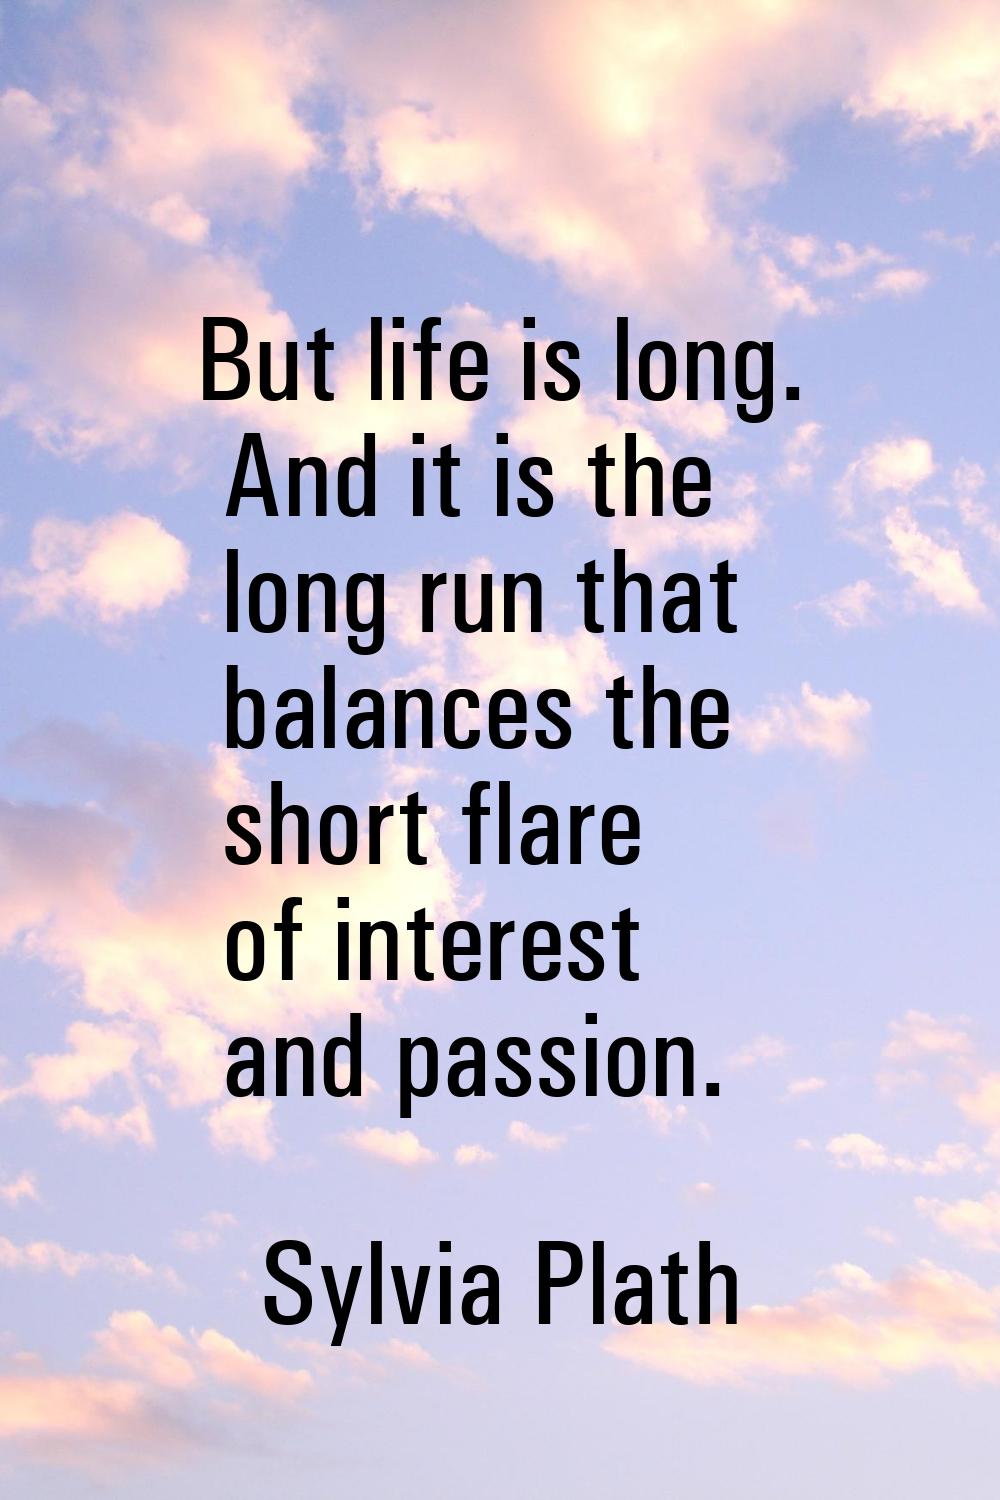 But life is long. And it is the long run that balances the short flare of interest and passion.